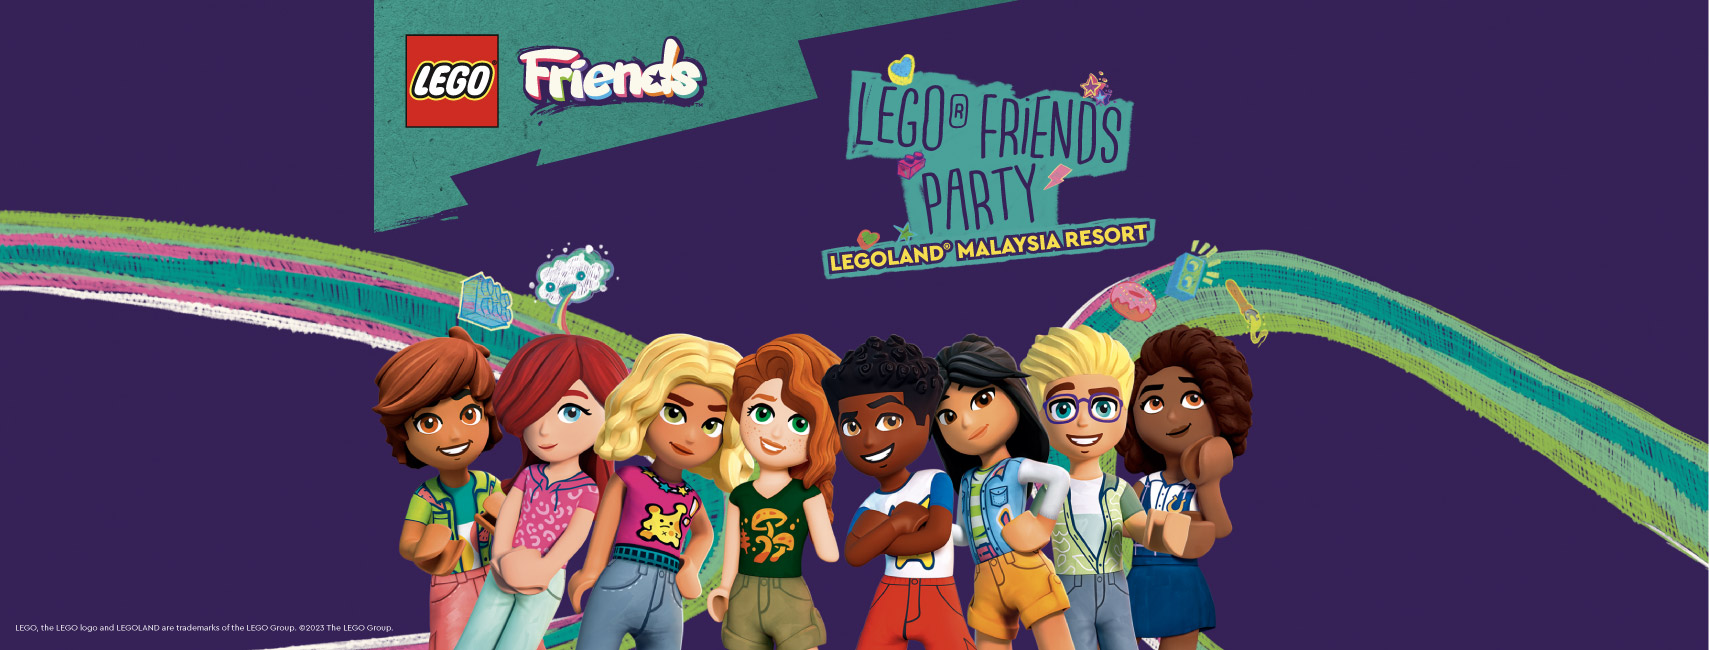 LEGO Friends Party